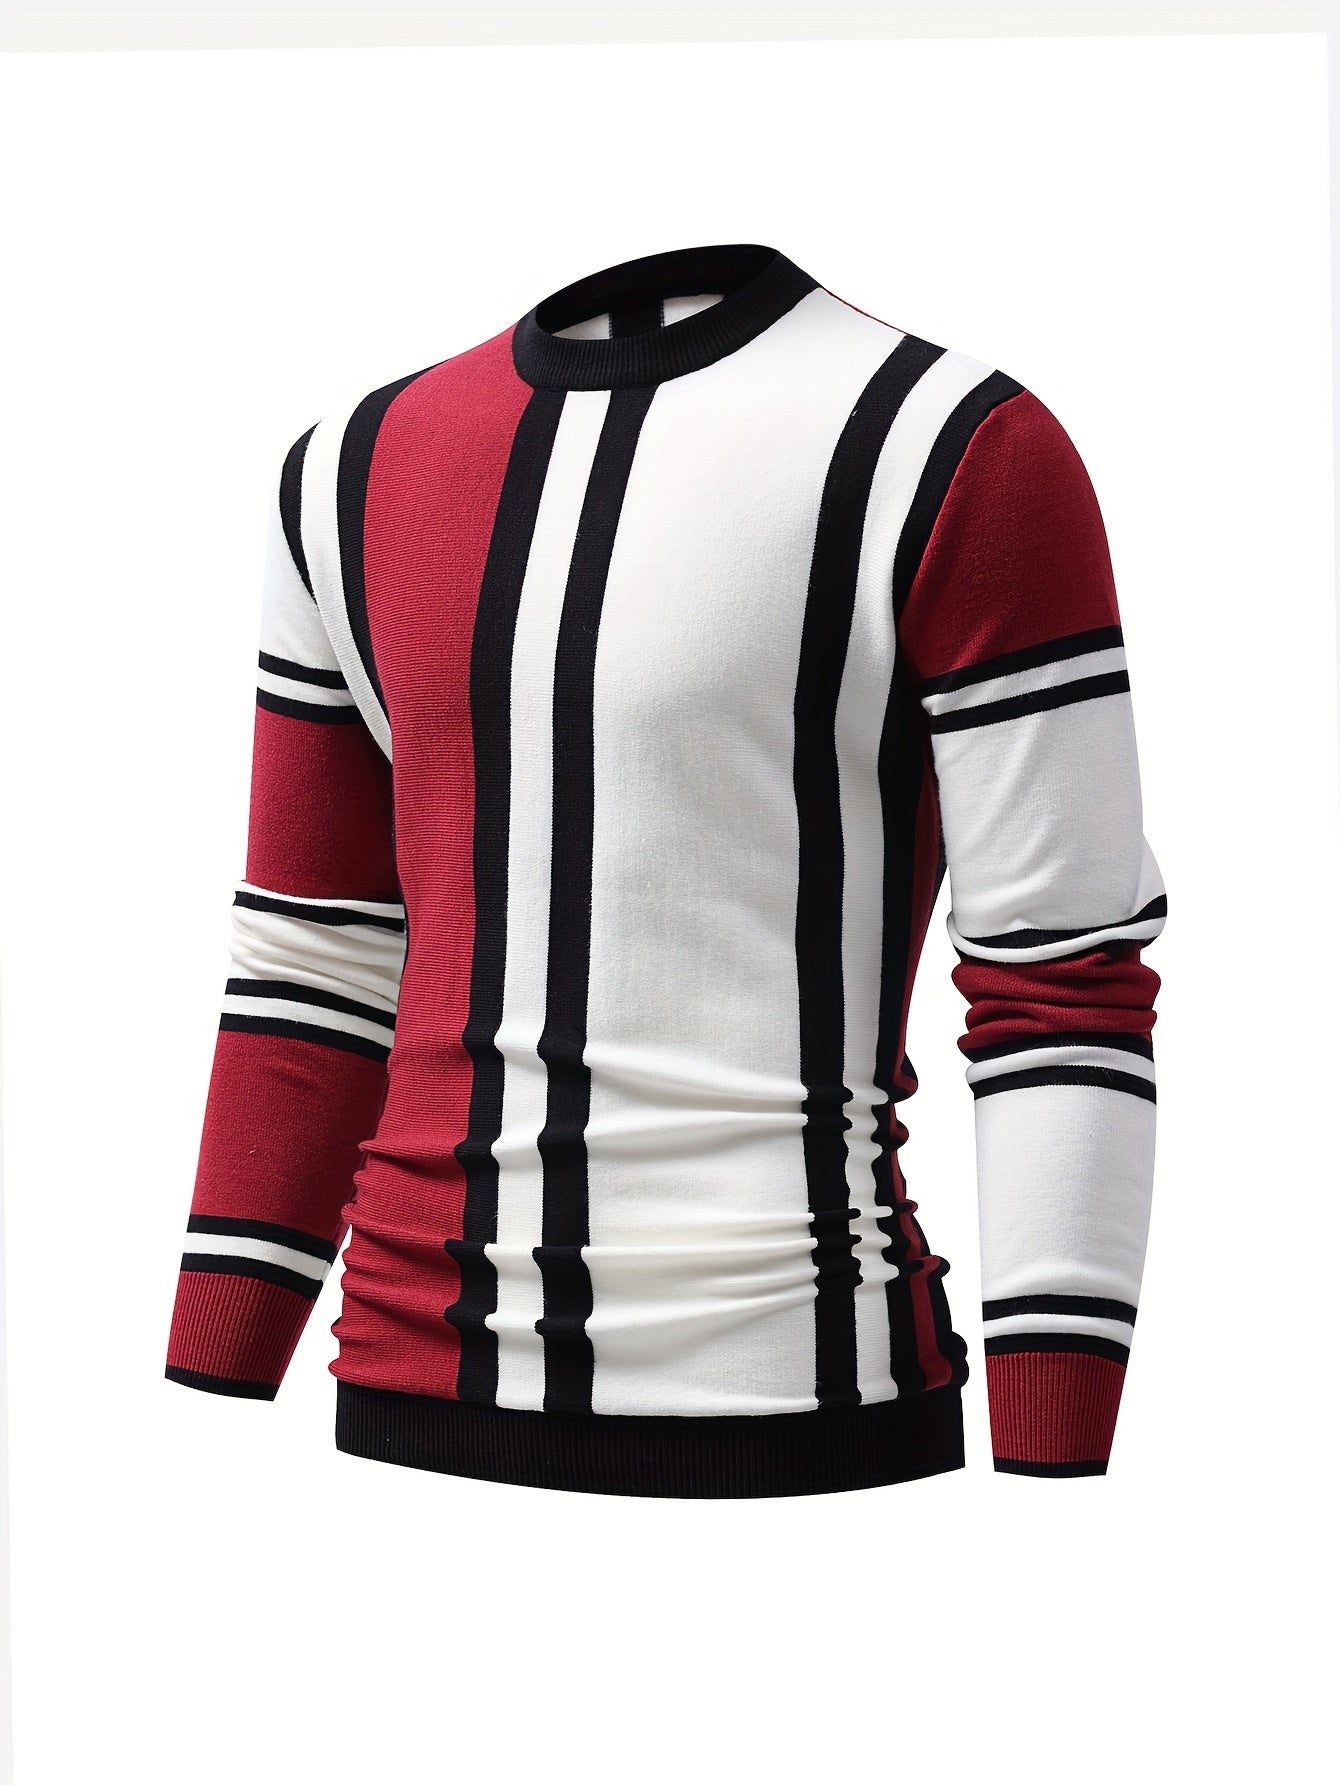 Foruwish - Color Block Design Chic Sweater, Men's Casual Warm High Stretch Crew Neck Pullover Sweater For Fall Winter